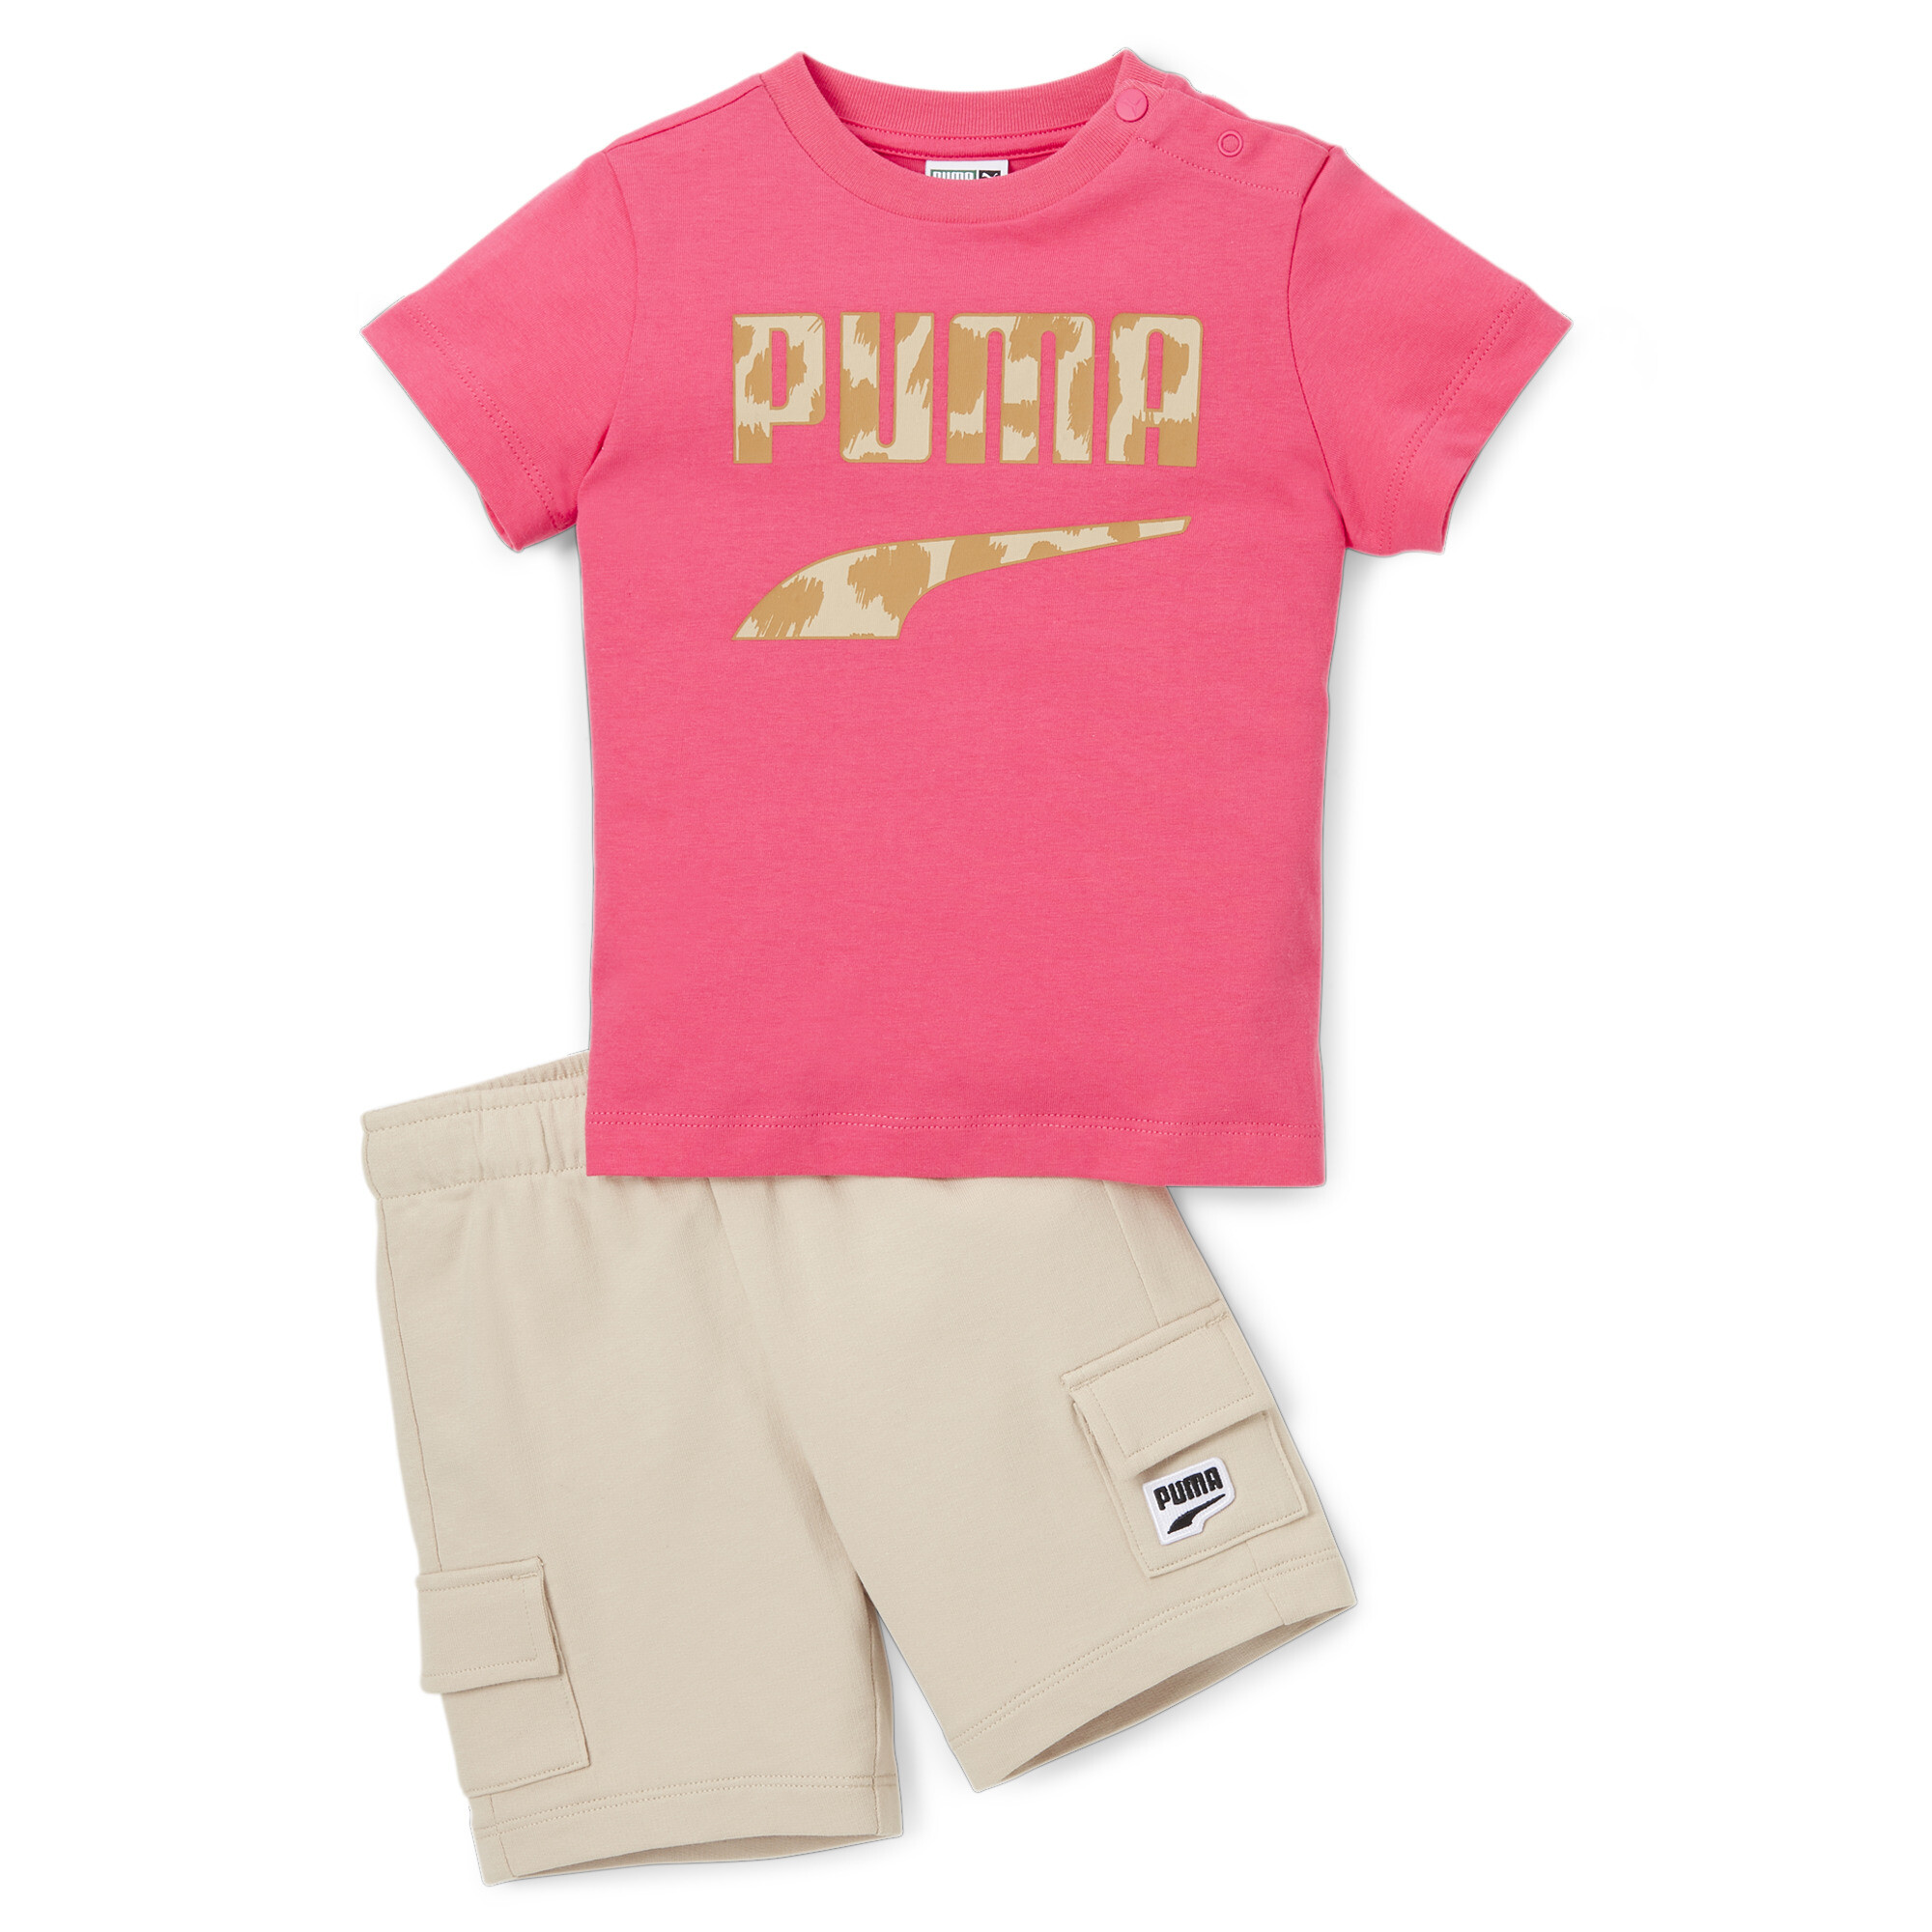 Kids' PUMA Minicats Downtown Set Baby In Pink, Size 9-12 Months